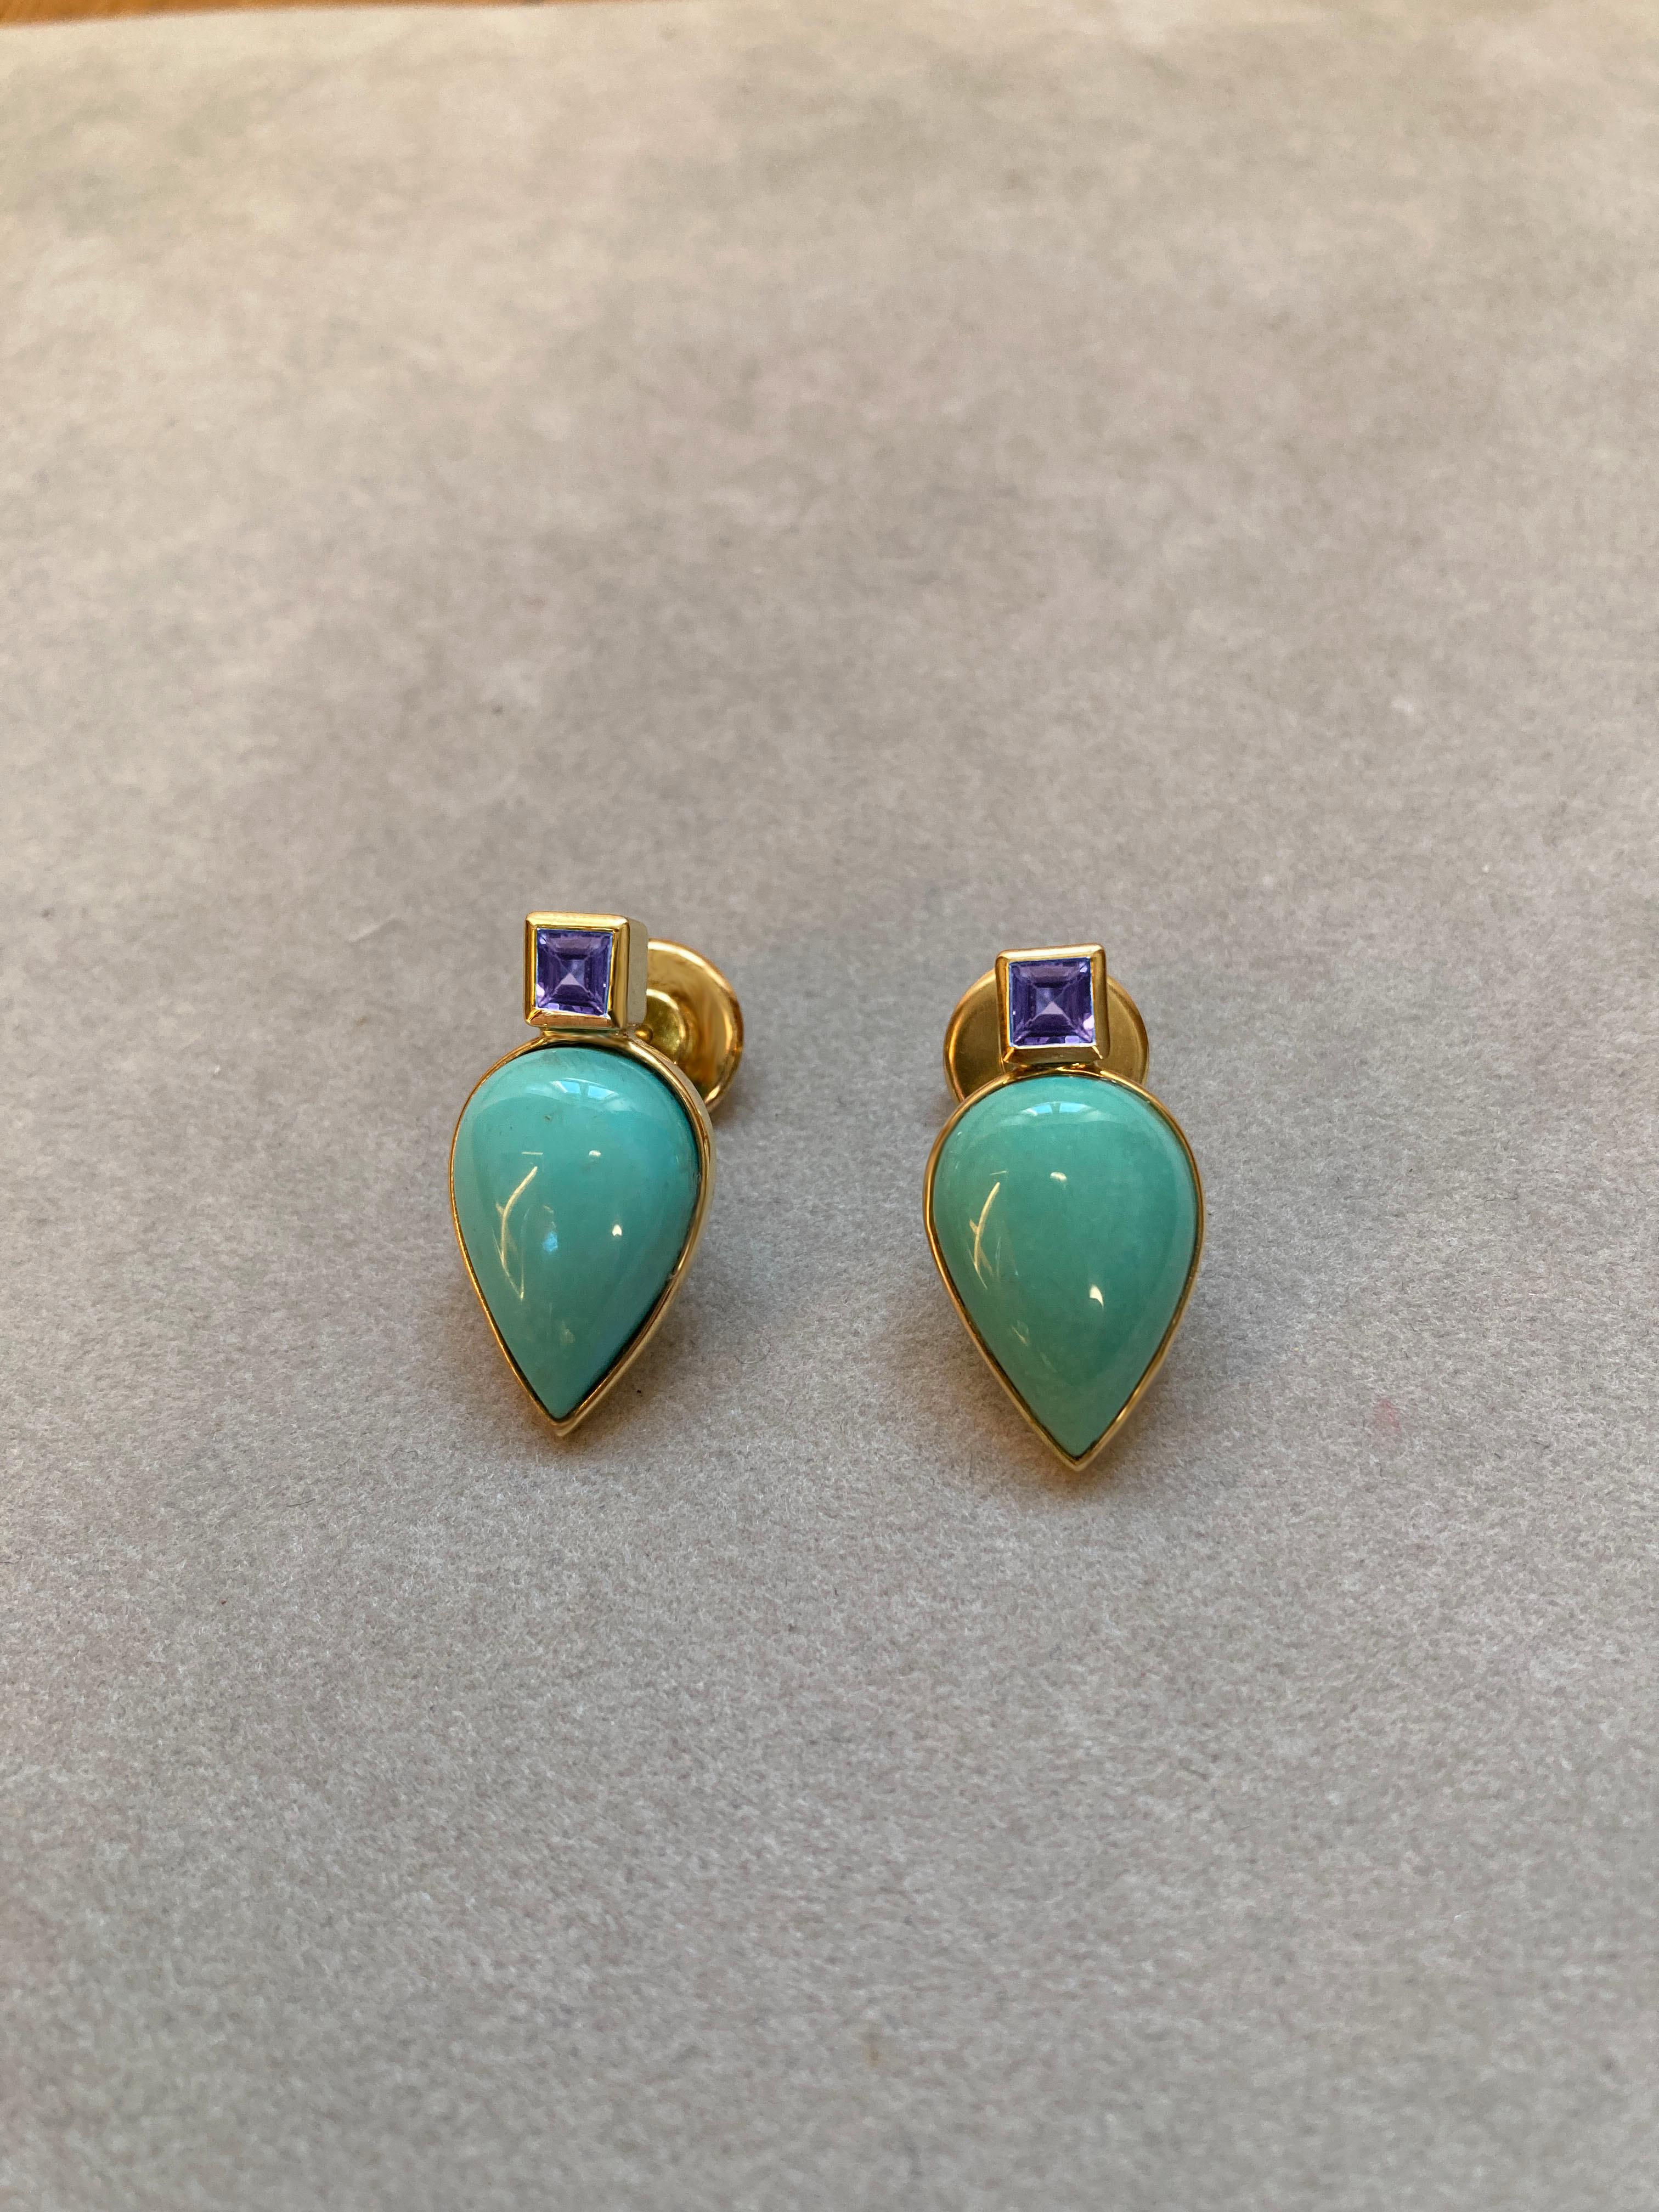 Rossella Ugolini 18K Yellow Gold Amethyst Turquoise Colored Earrings  In New Condition For Sale In Rome, IT